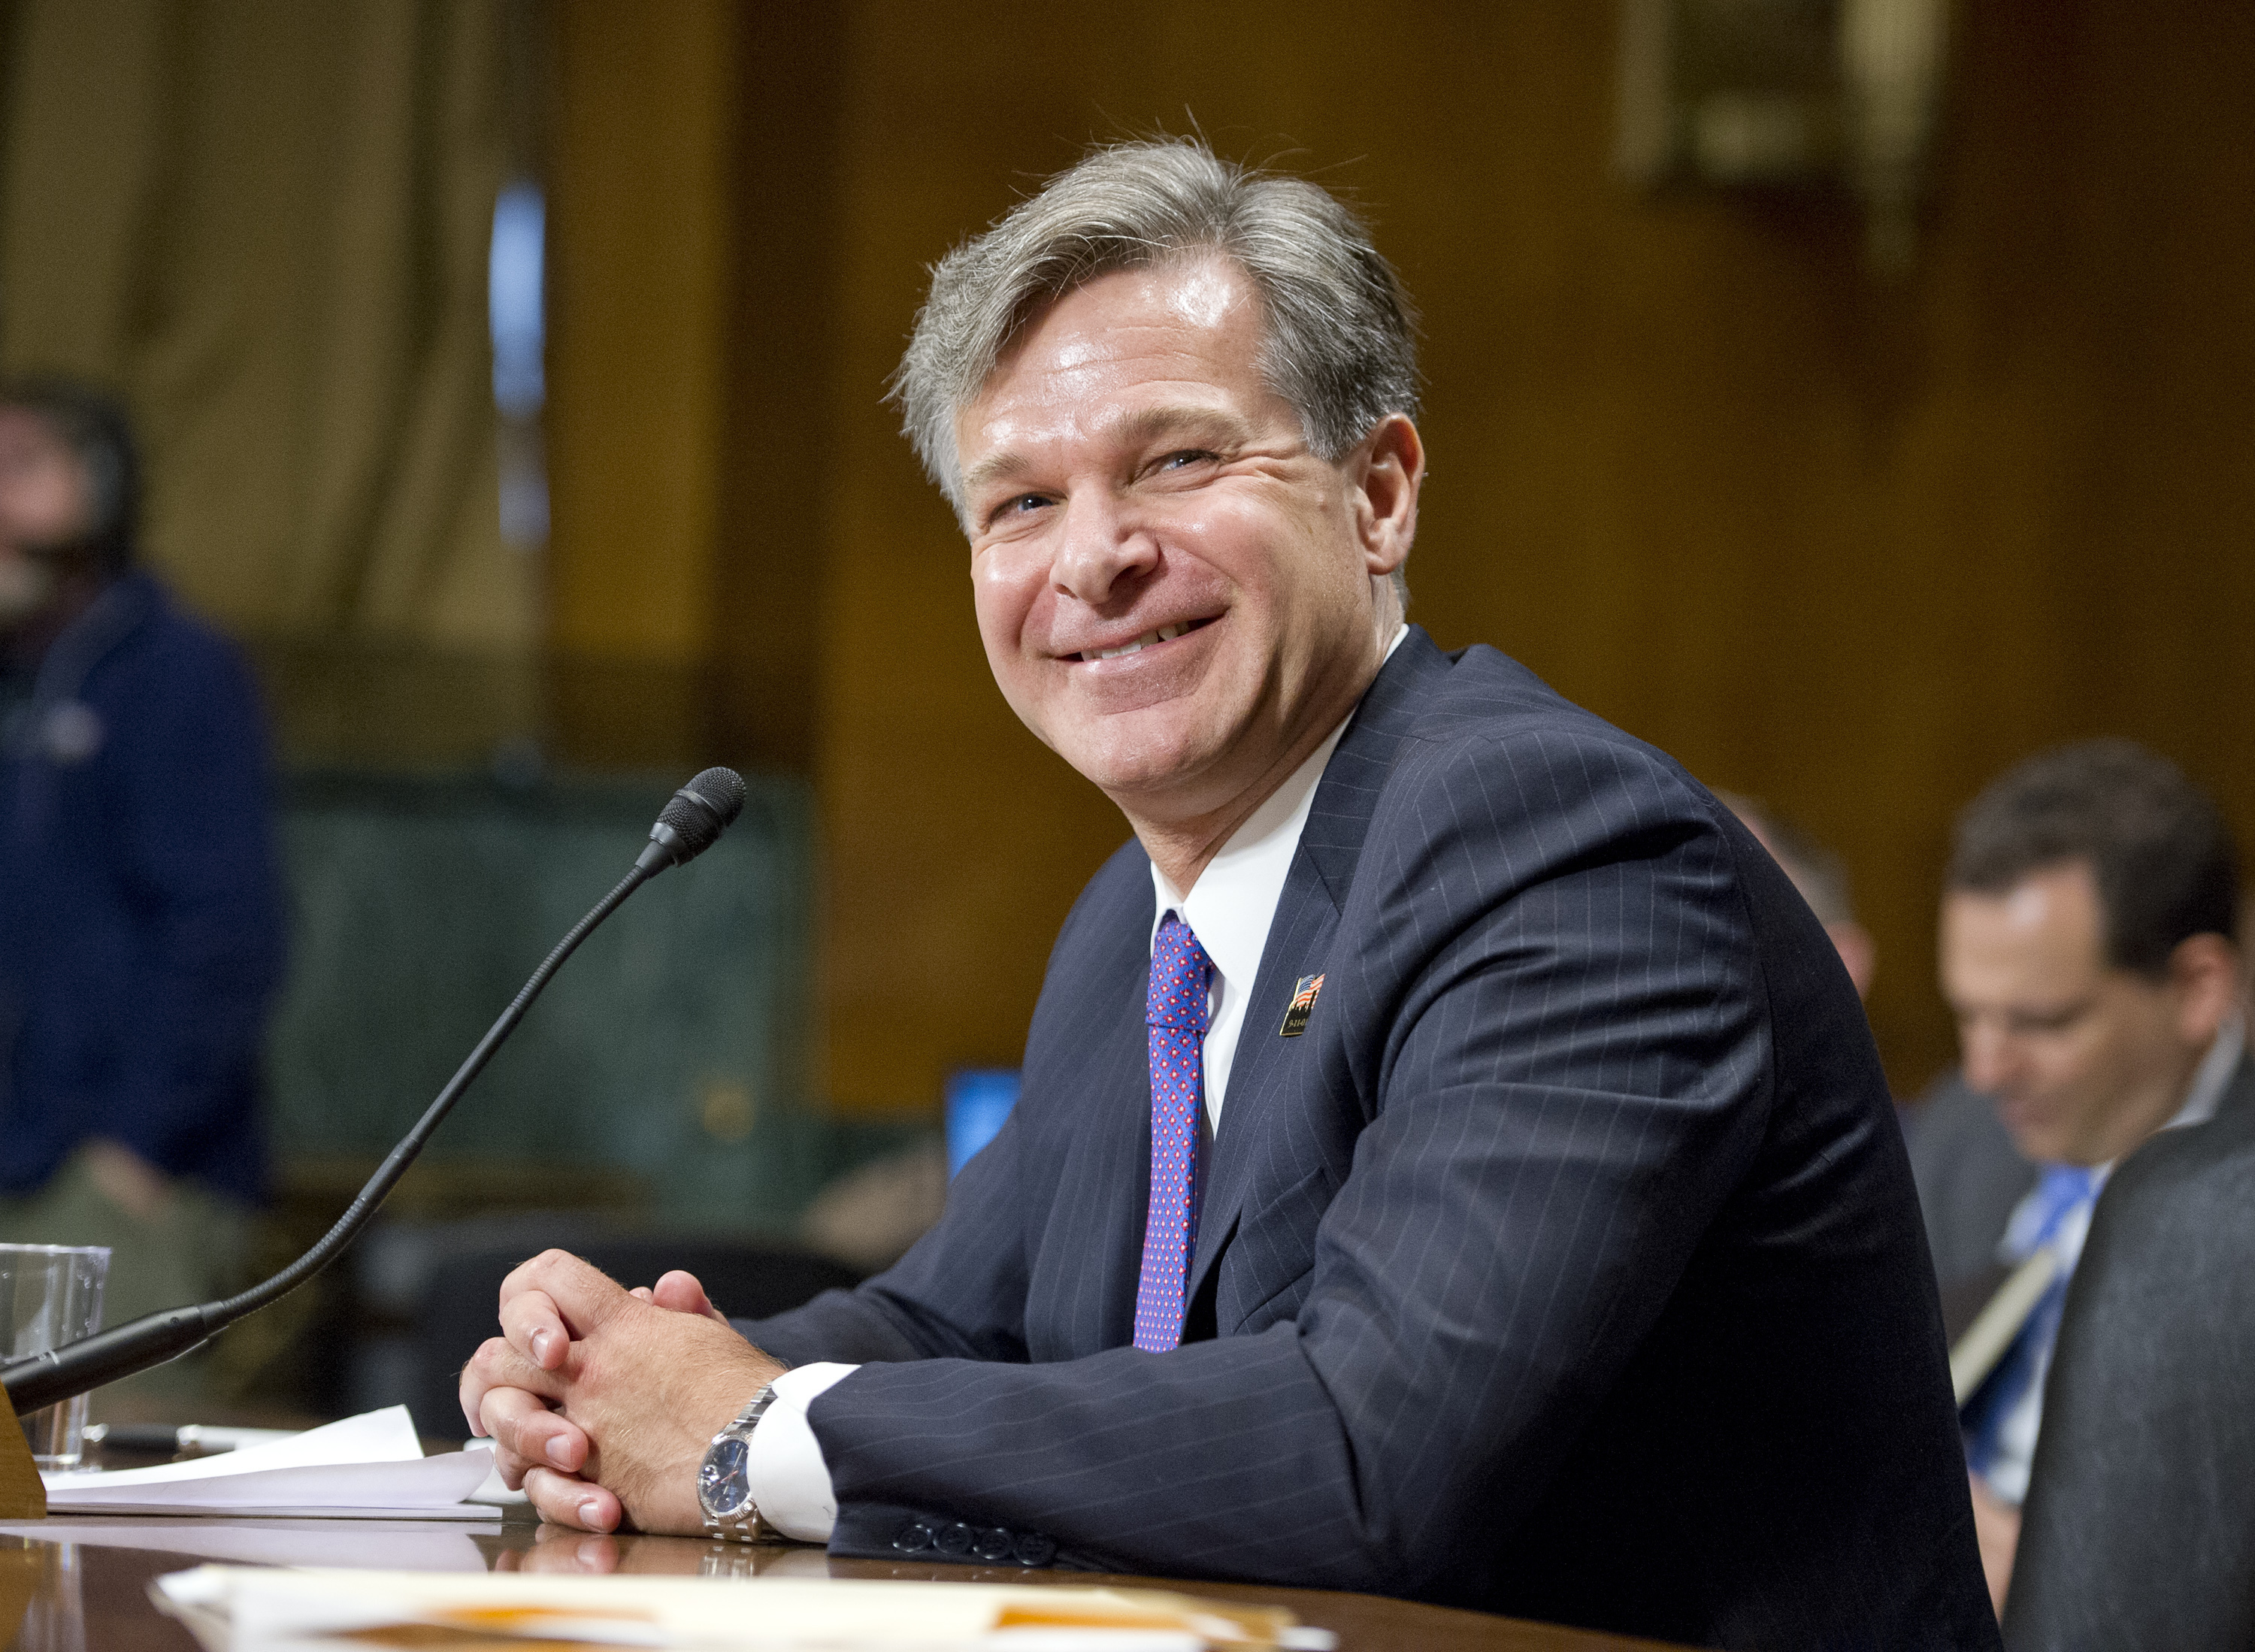 Christopher Wray testifies on his nomination to be Director of the FBI before the U.S. Senate Committee on the Judiciary in Washington, D.C. on July 12, 2017. (Ron Sachs—picture-alliance/dpa/AP Images)